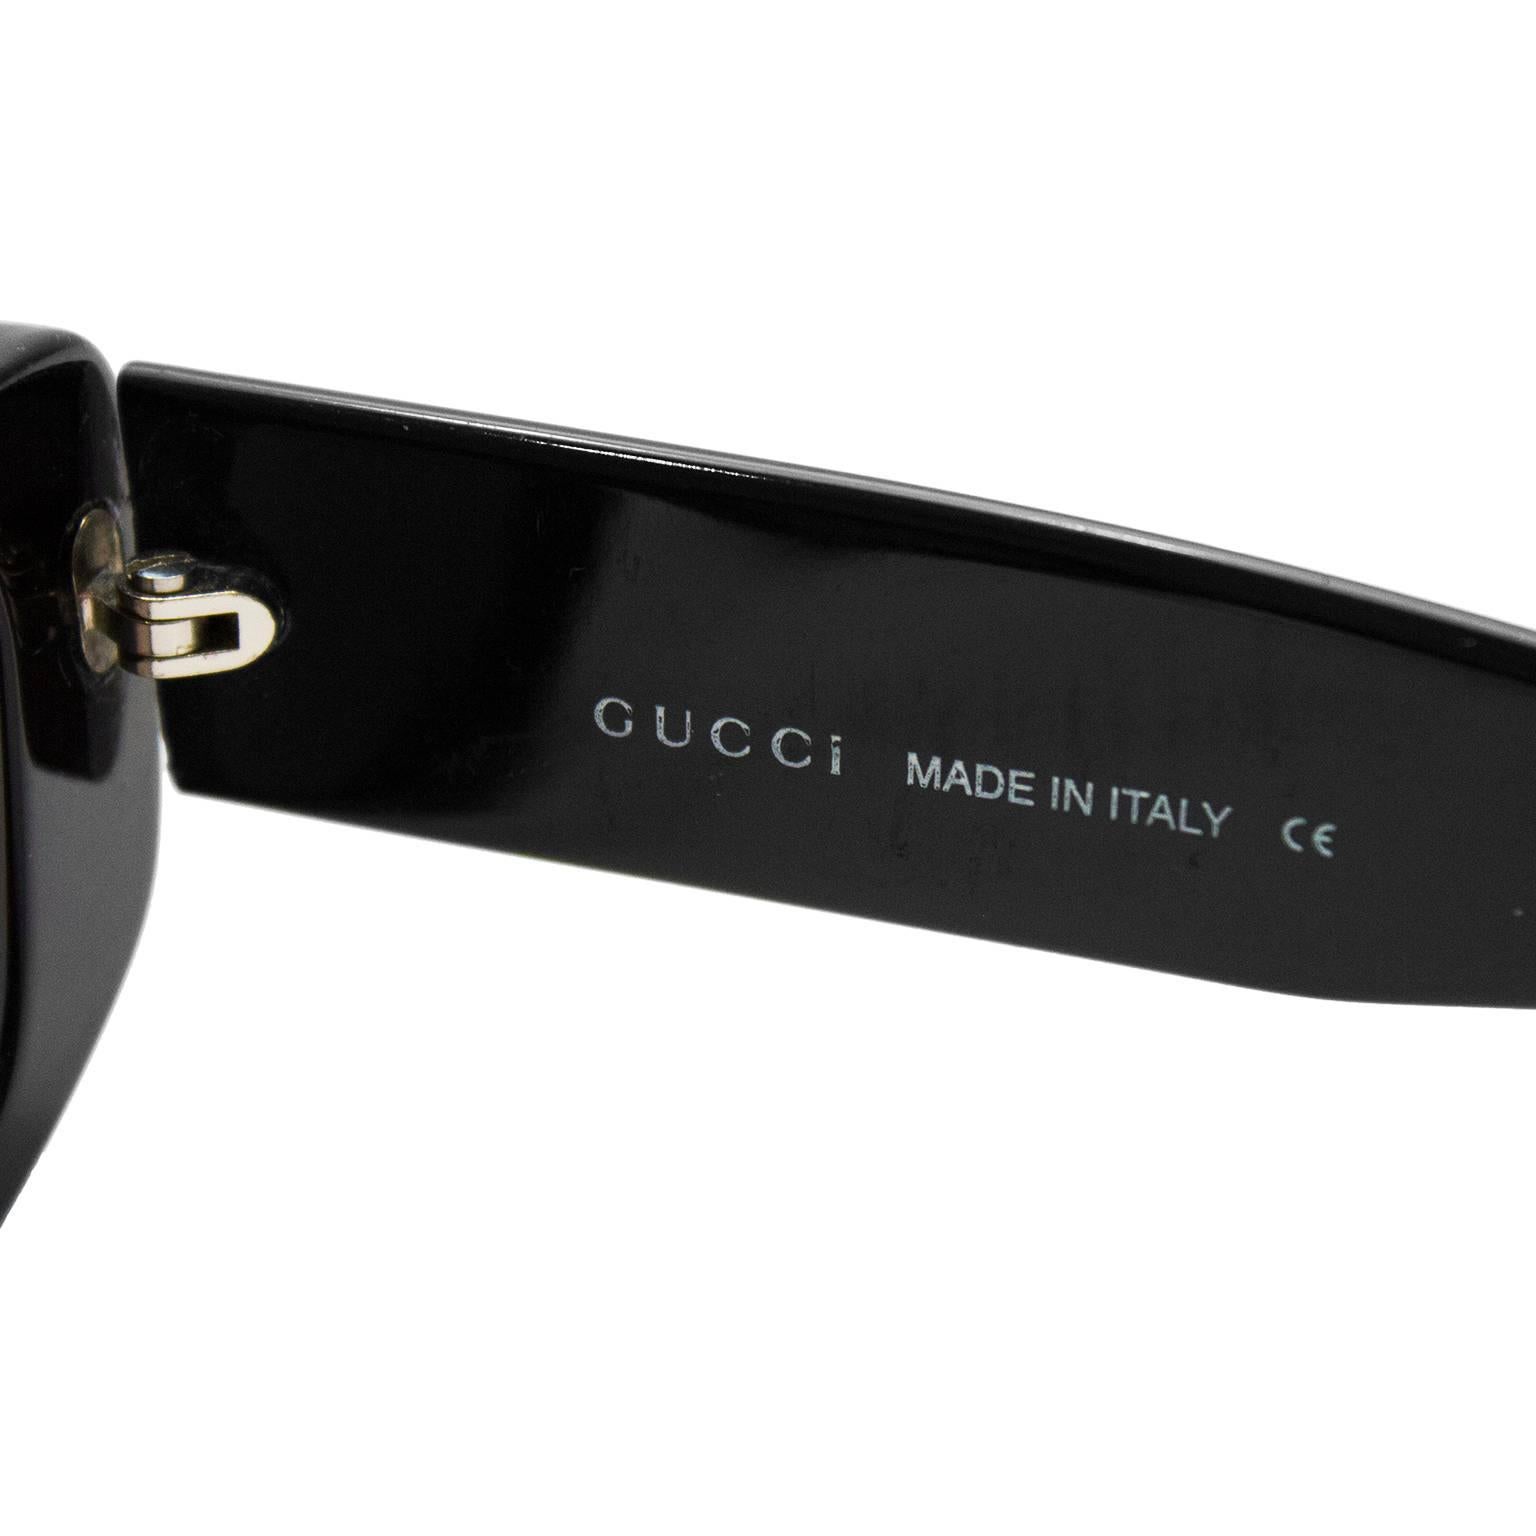 gucci made in italy ce